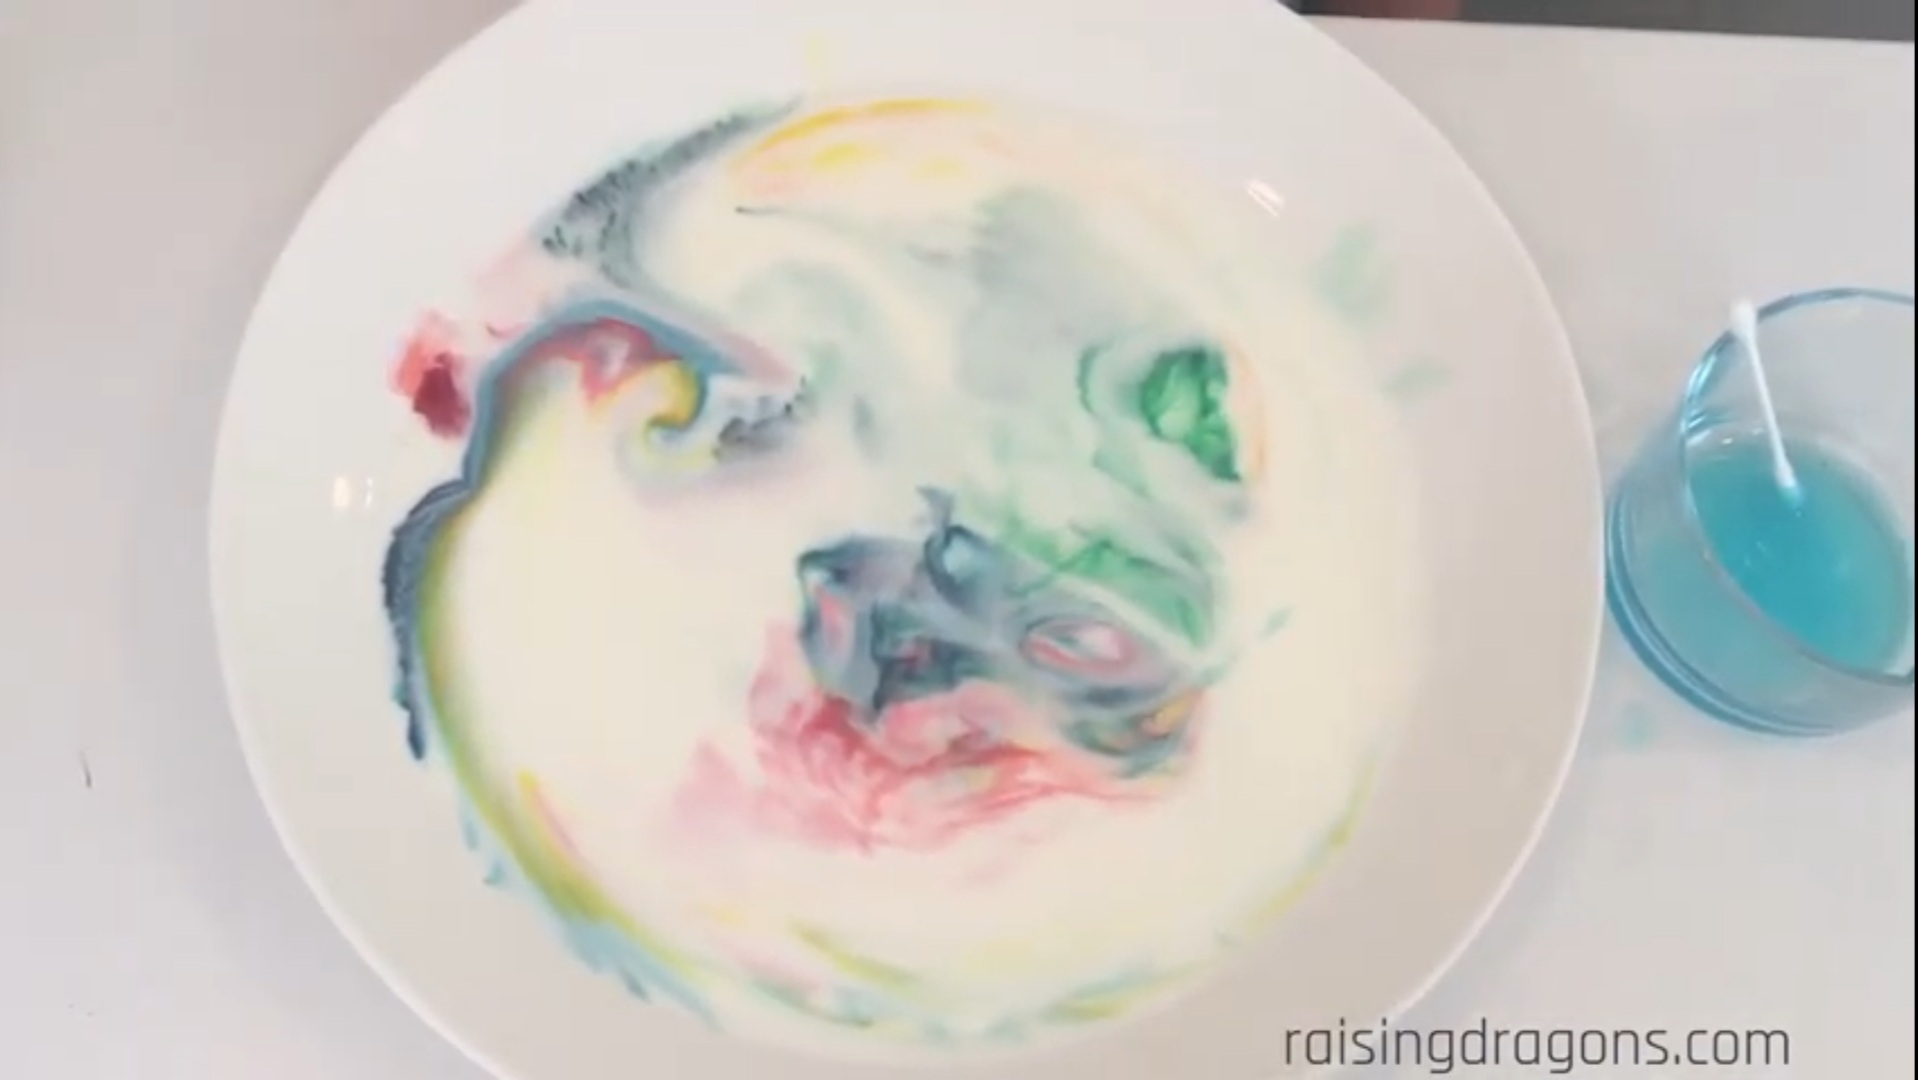 5 Fun & Cool Science Activities with Dye to Do With the Kids 8